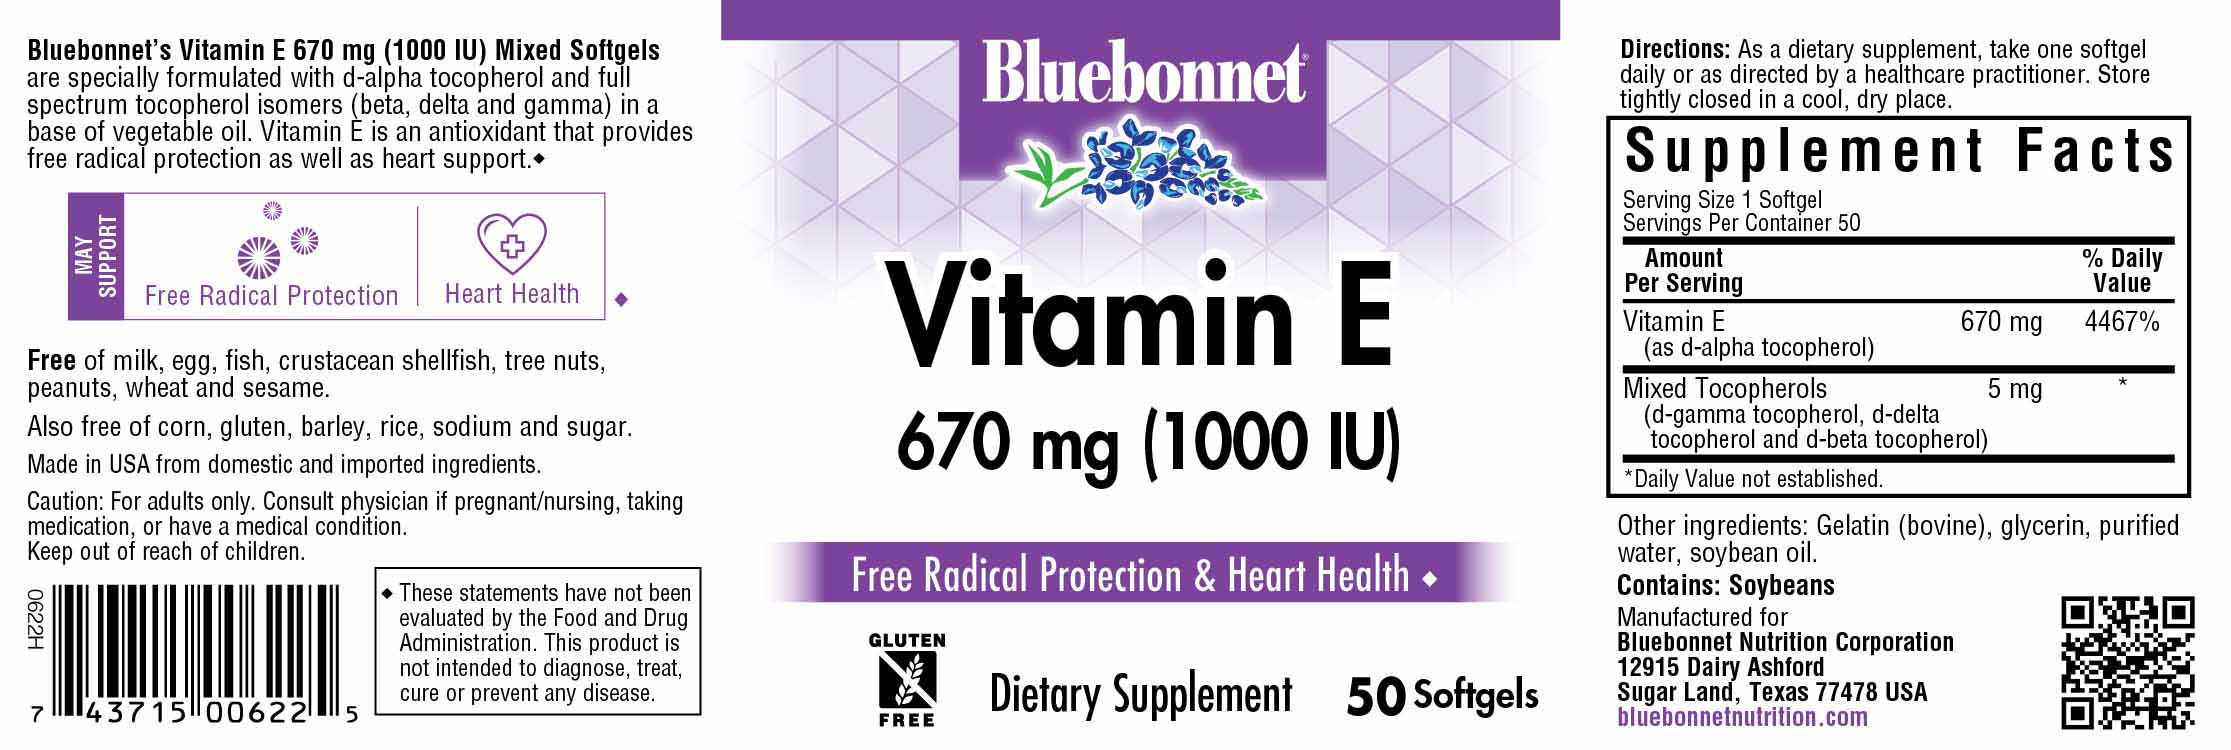 Bluebonnet’s Vitamin E 1000 lU (670 mg) Mixed Softgels are specially formulated with d-alpha tocopherol and full spectrum tocopherol isomers (beta, delta and gamma) in a base of vegetable oil. Vitamin E is an antioxidant that provides free radical protection as well as cardiovascular support. #size_50 count